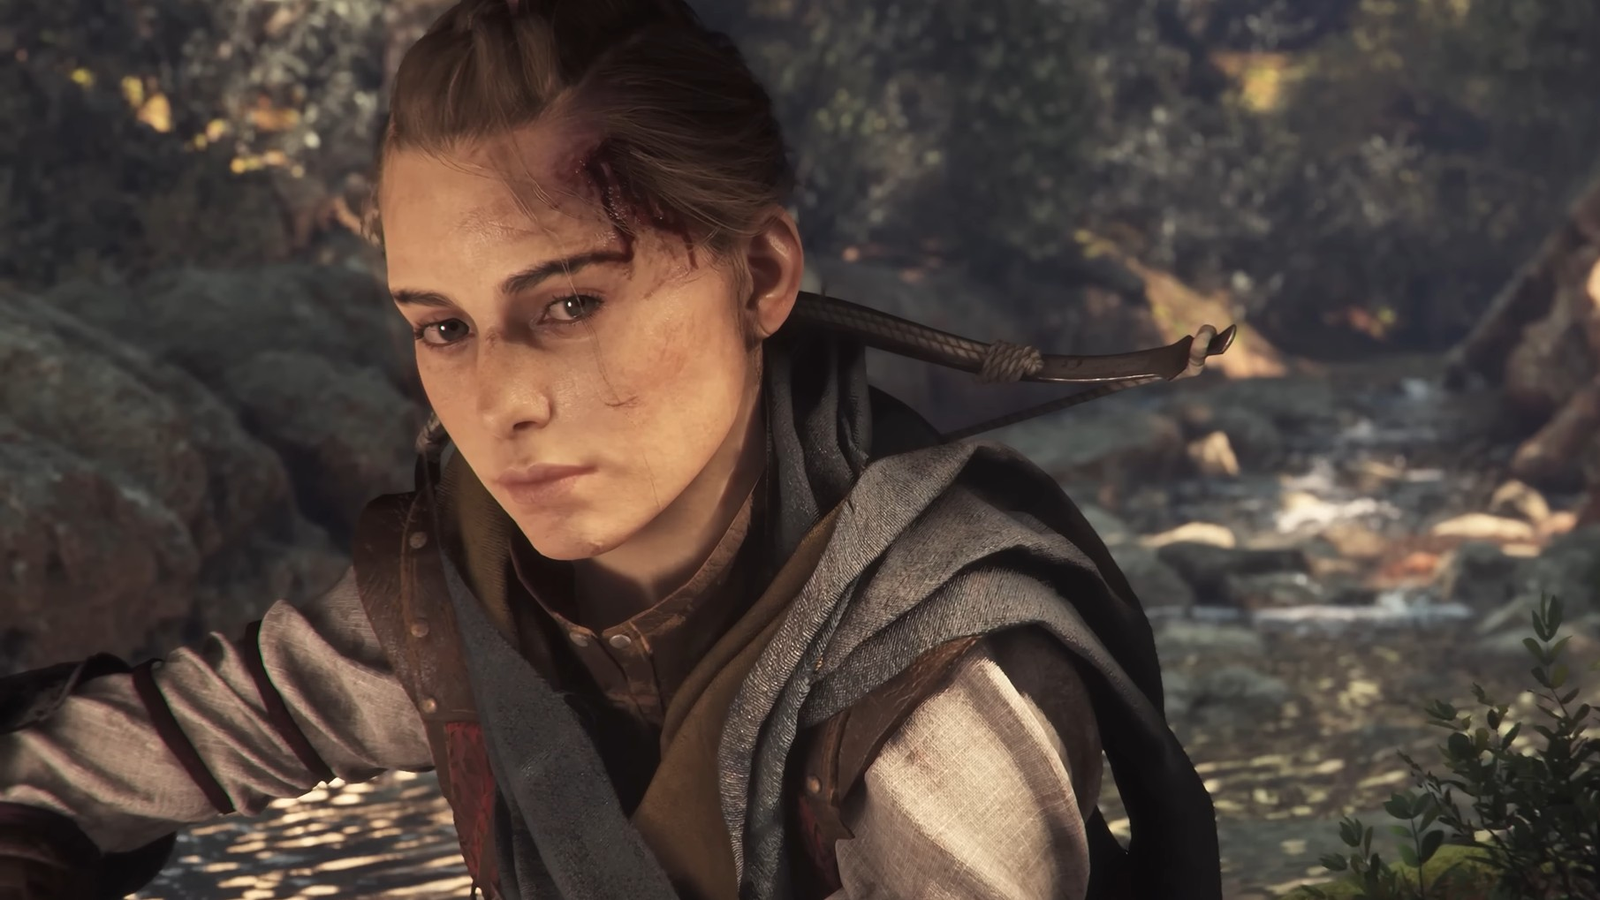 A Plague Tale: Requiem review - a brutal, spectacular adventure of love and  sacrifice